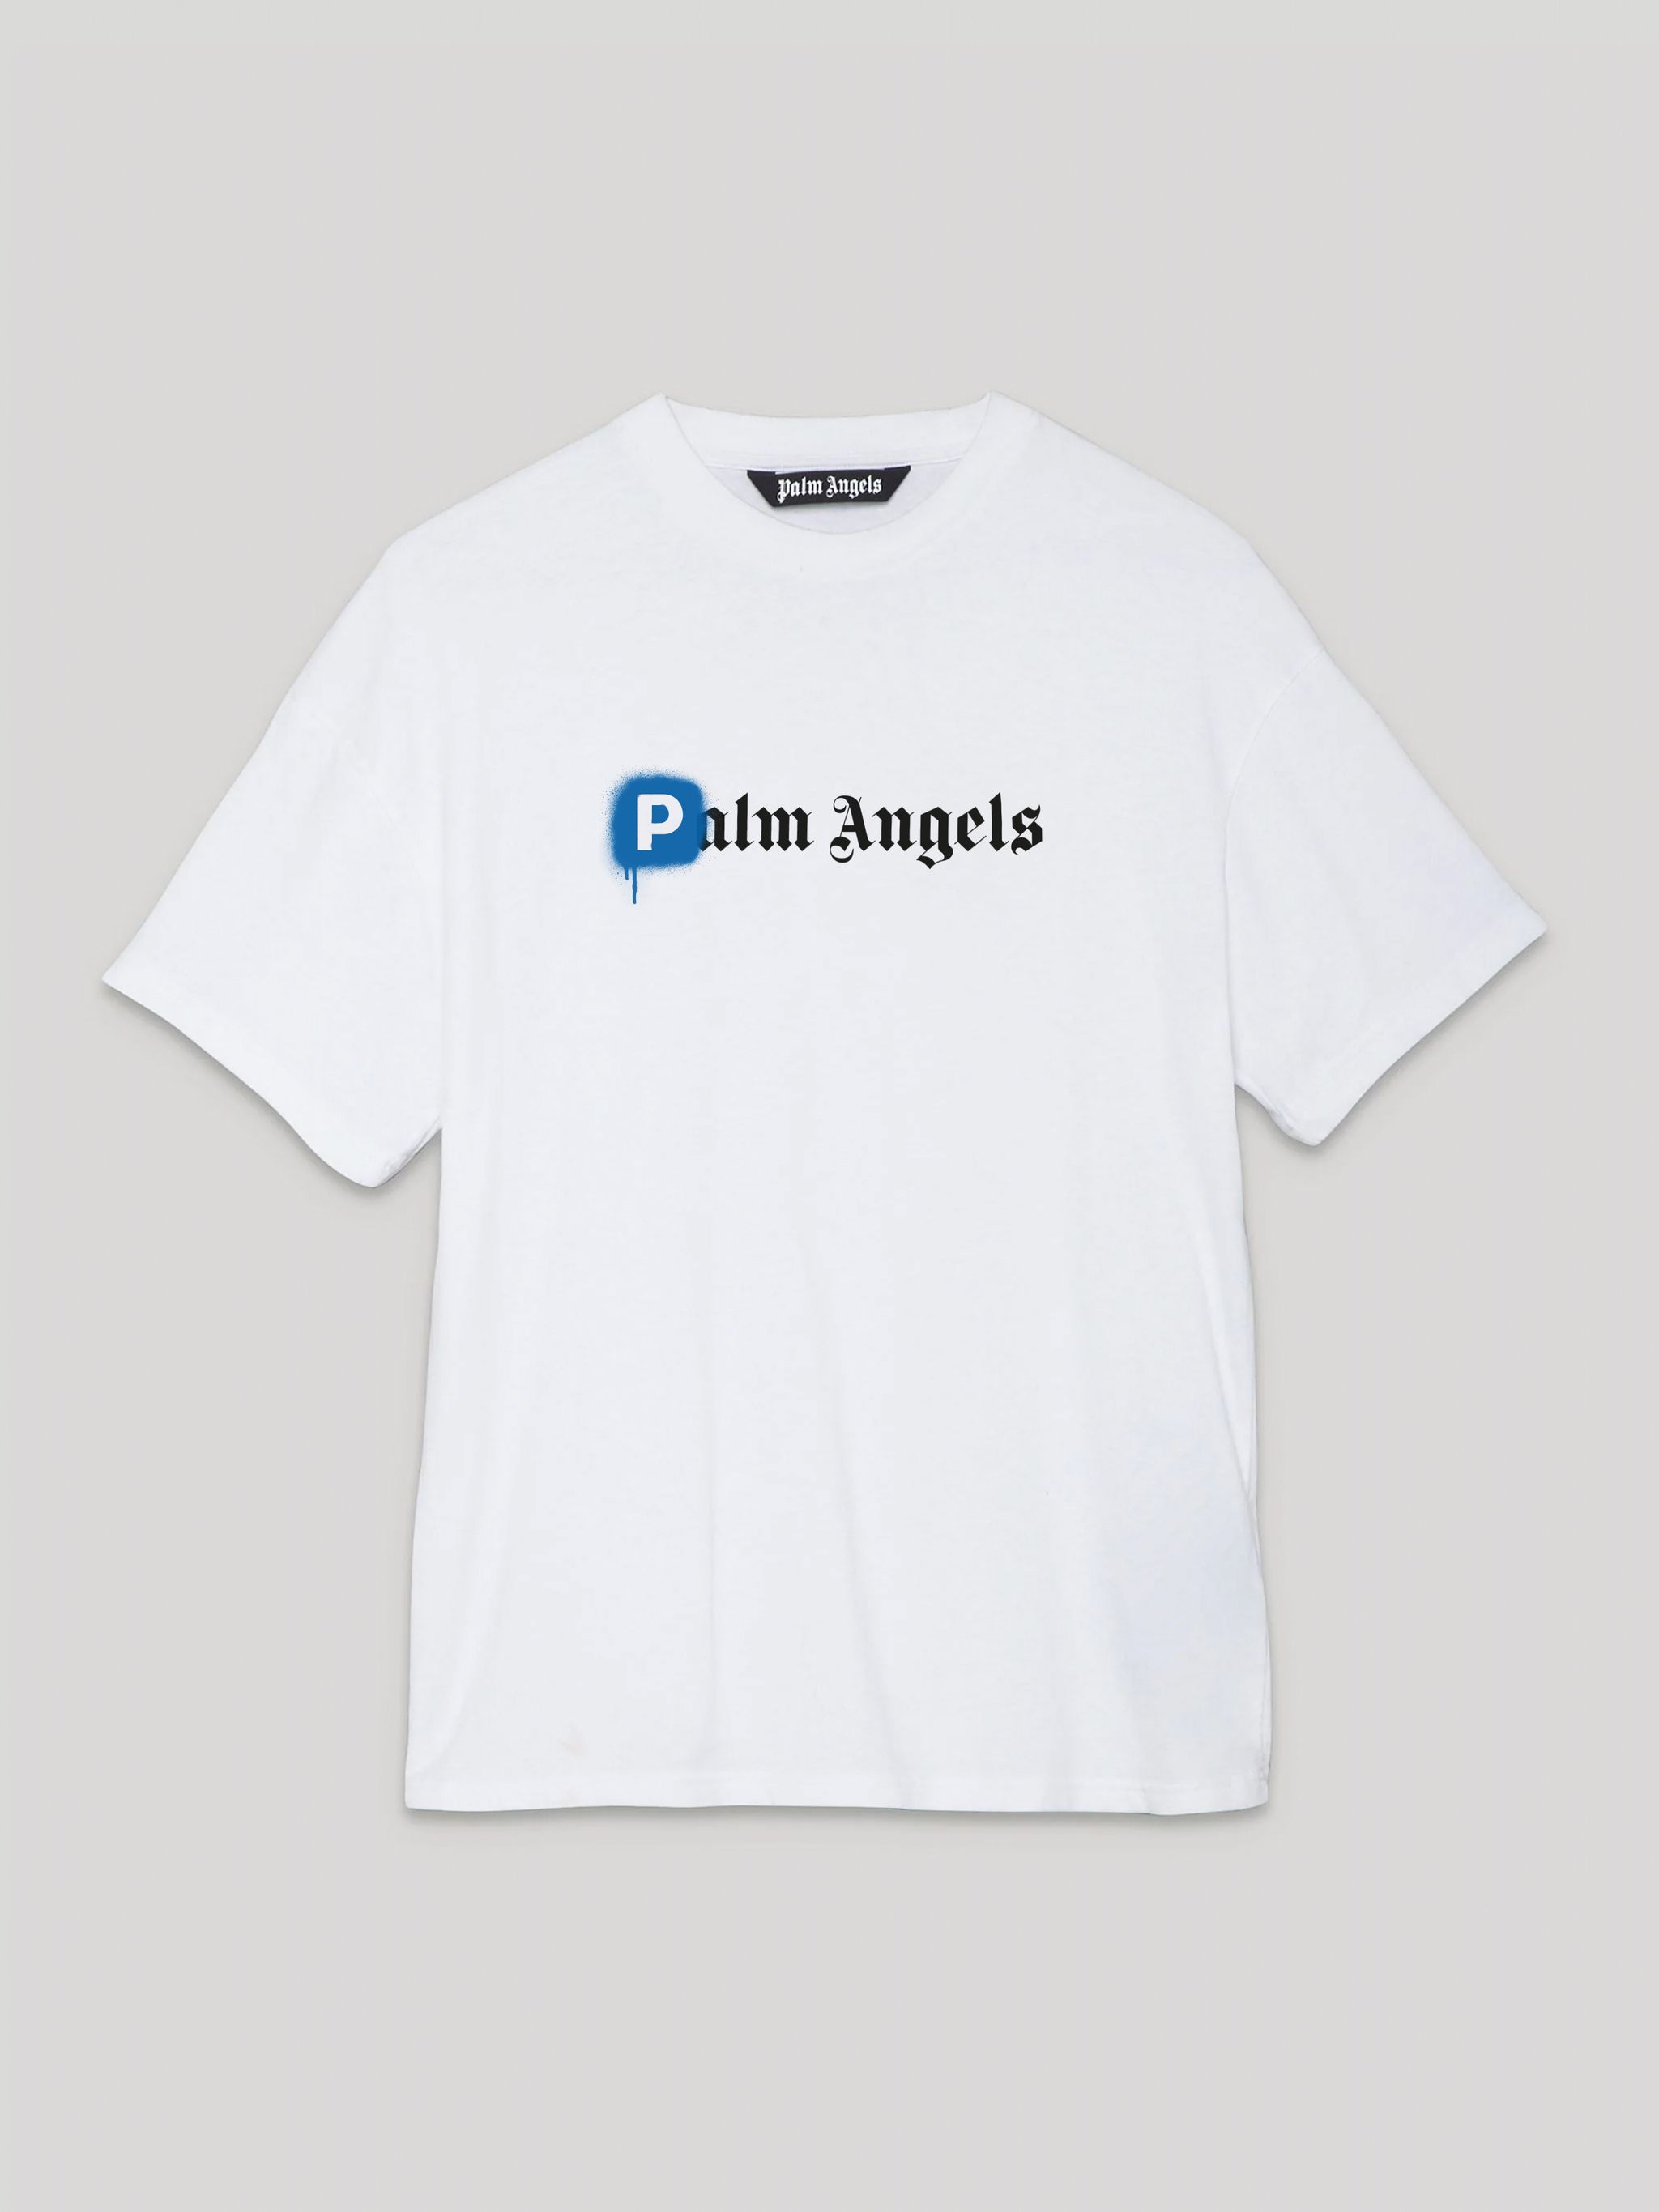 T-SHIRT JUST FOR P'Z | PALM ANGELS X GUNNA